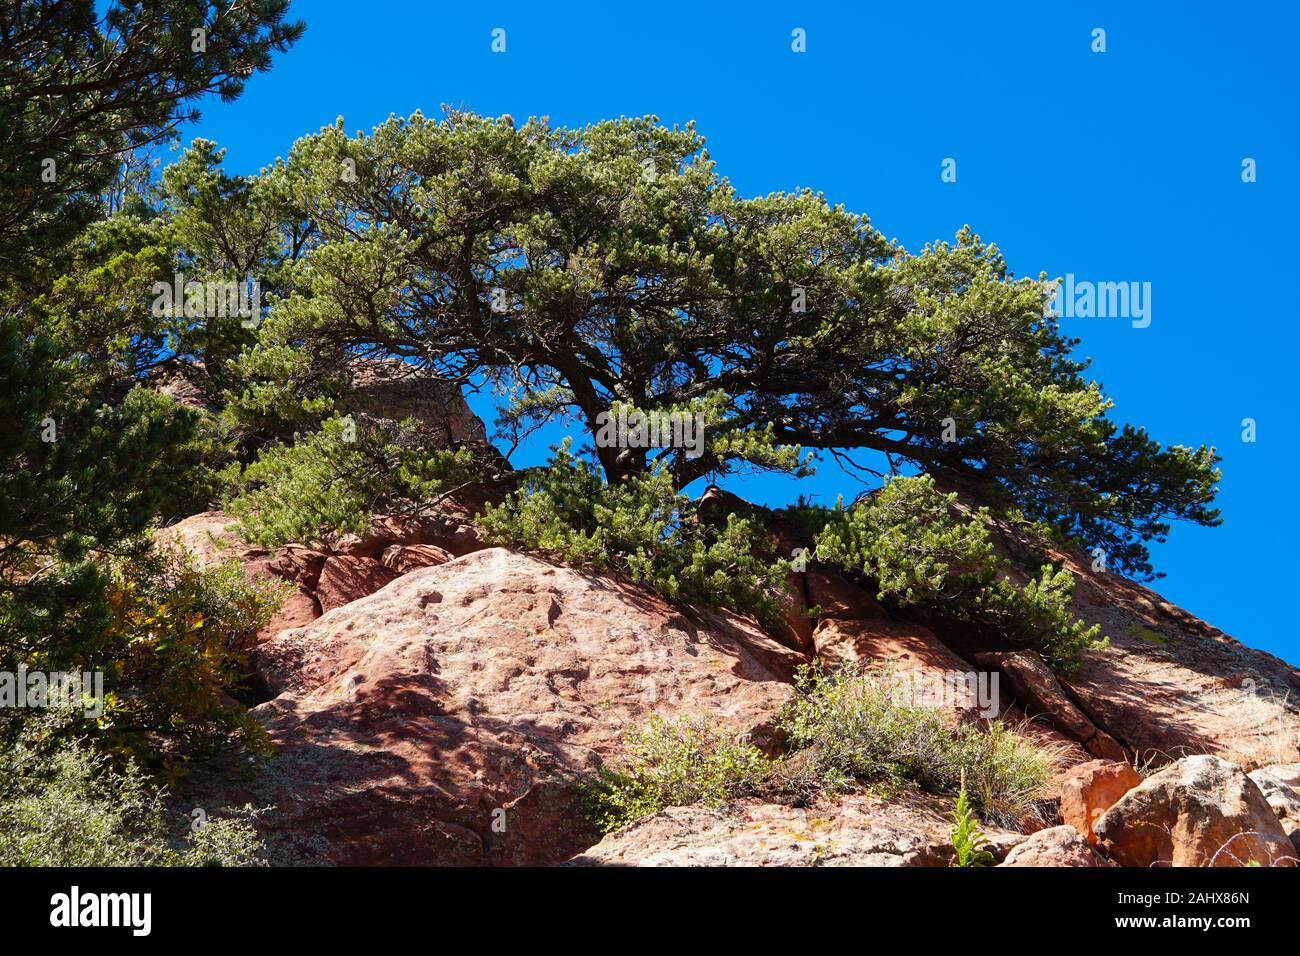 A big, beautifully shaped pine tree has grown out of the red rock landscape and shows even better with the brilliant blue sky behind it. Stock Photo